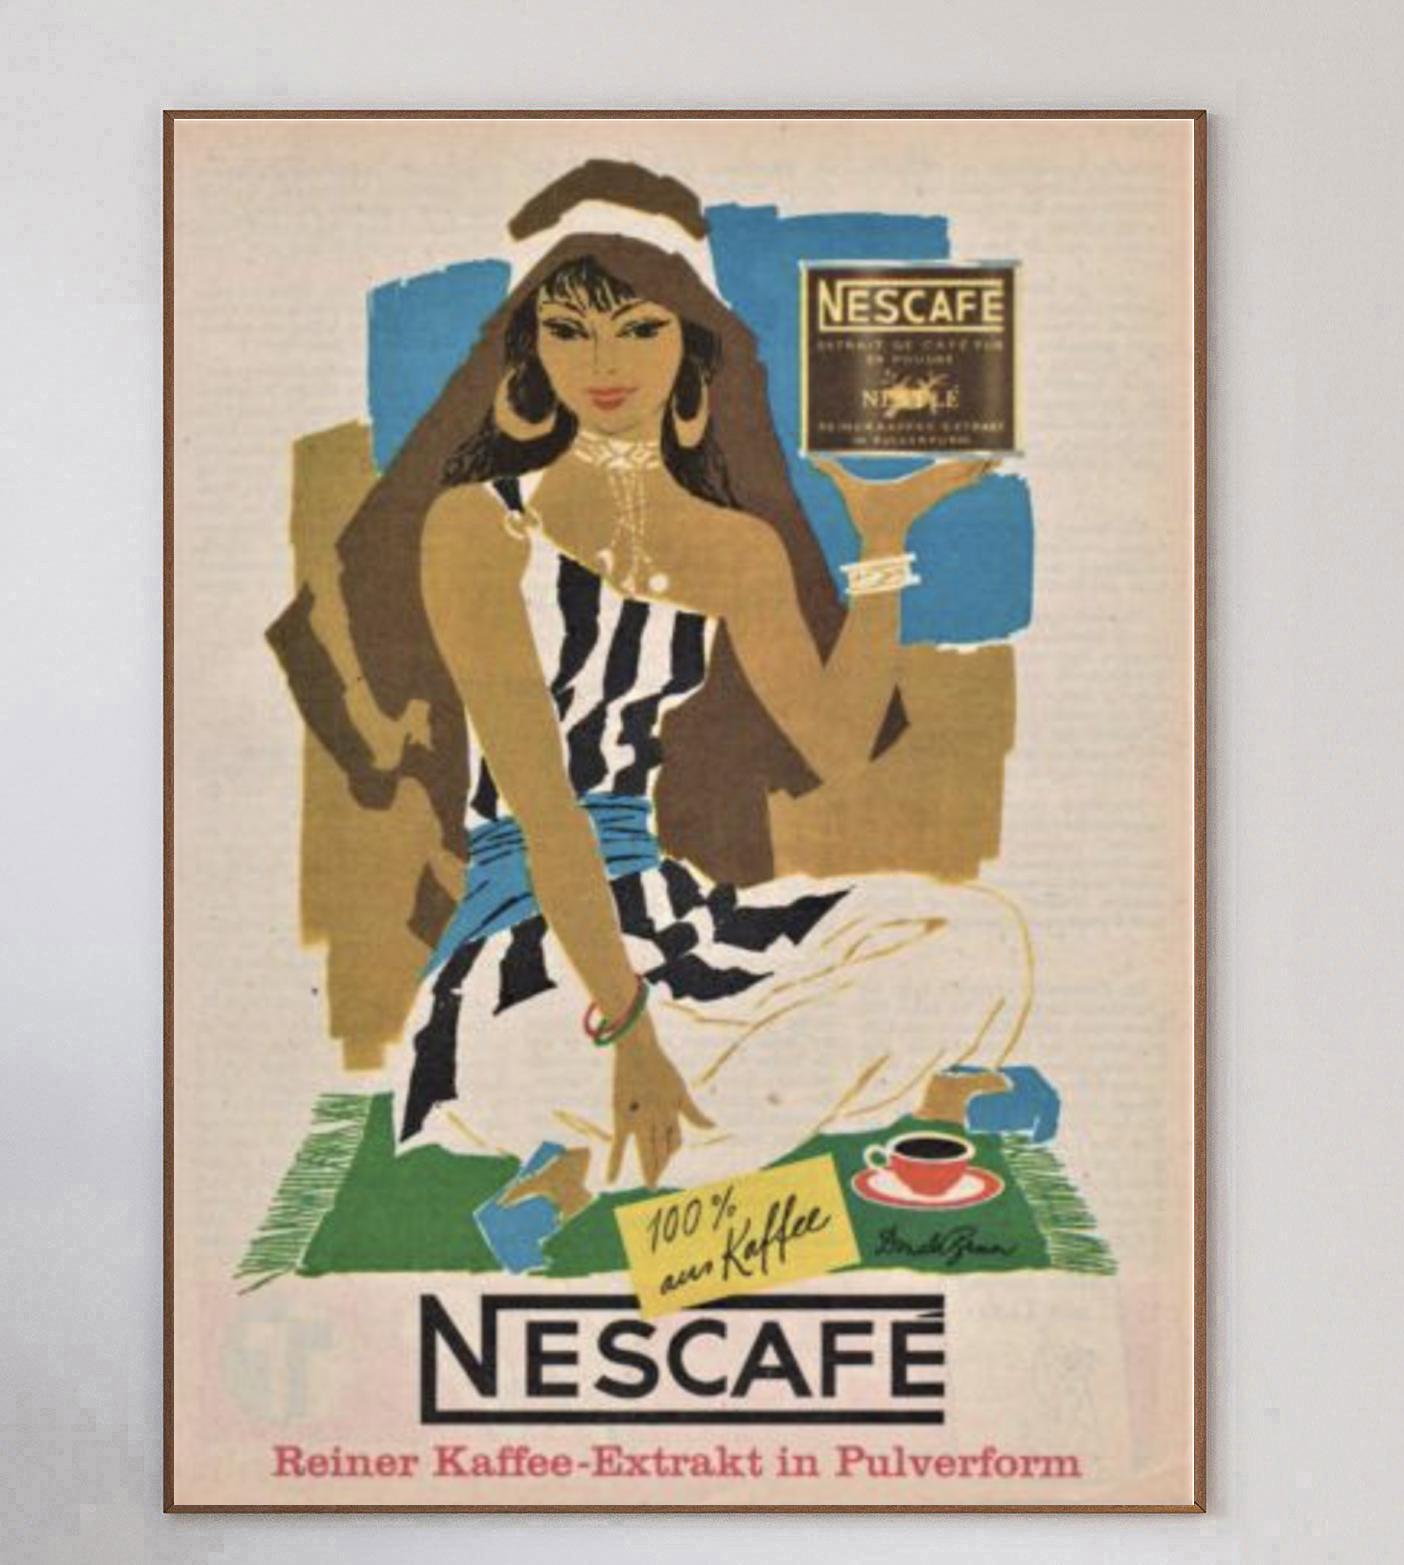 With beautiful artwork from Swiss graphic designer Donald Brun depicting a woman sat enjoying a coffee, this gorgeous poster was created in 1963 to promote Nescafe. Beginning in Switzerland in 1938, Nescafe is Nestle's flagship coffee brand and